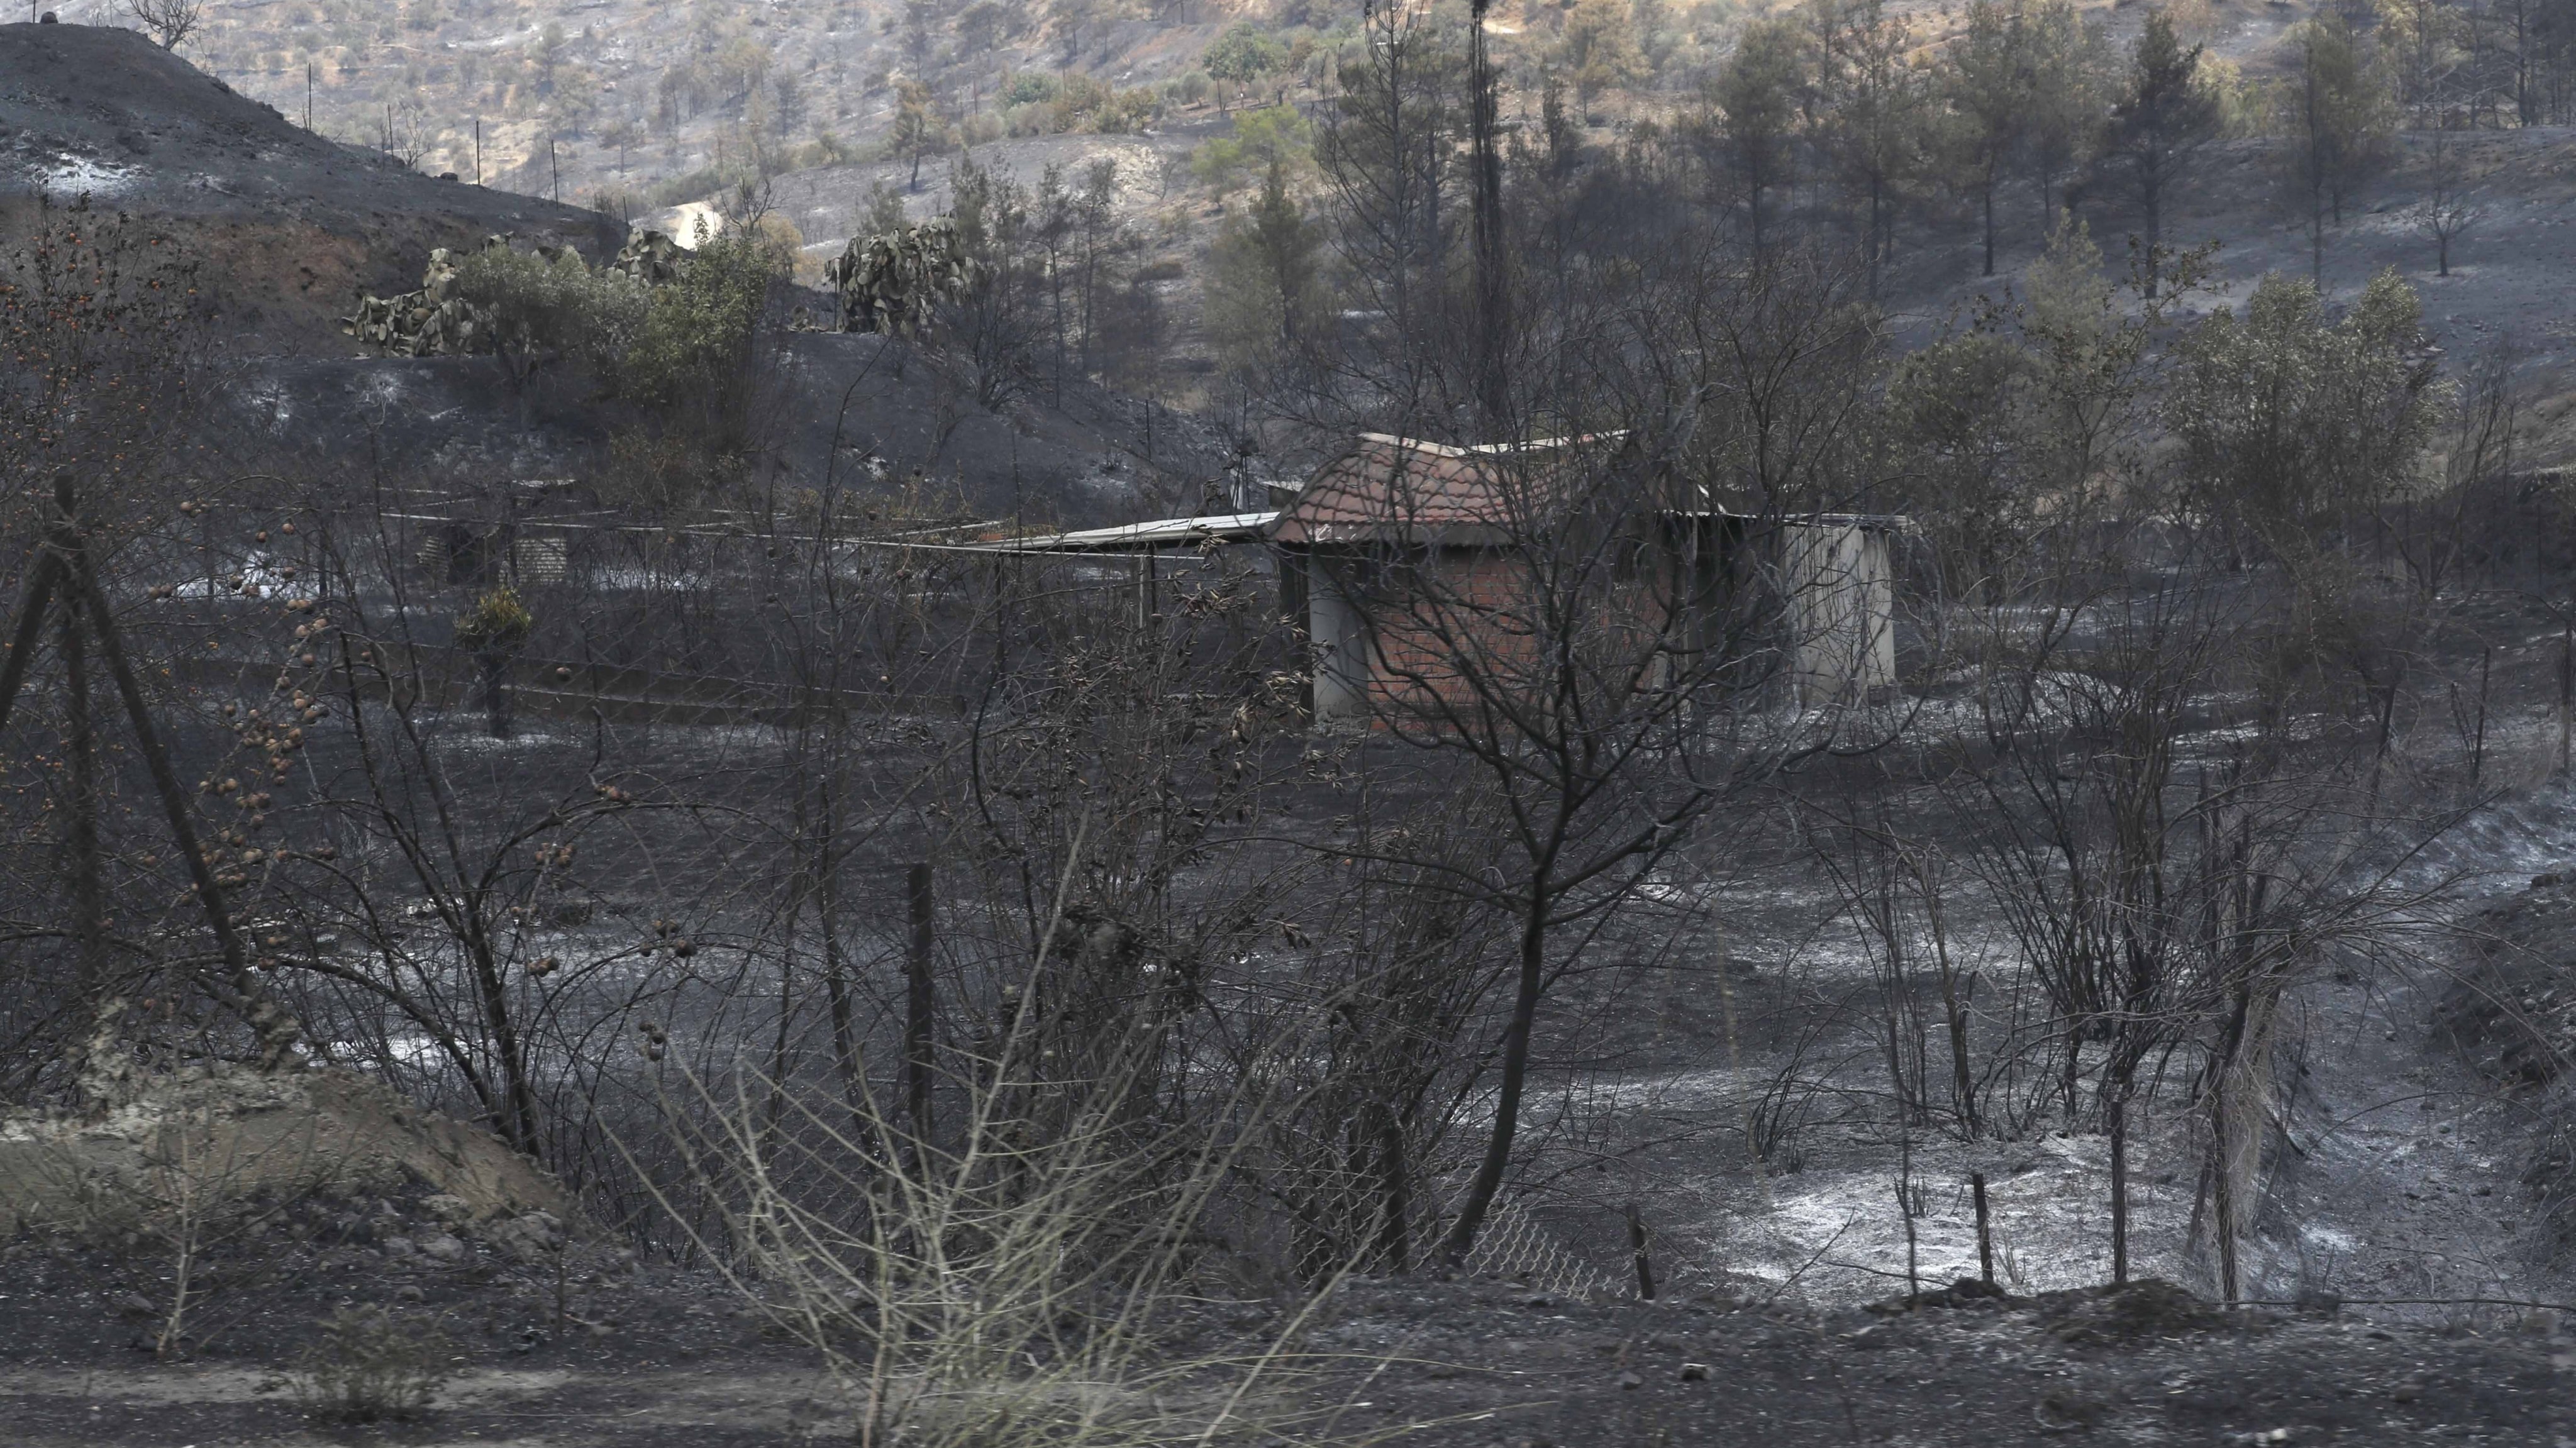 Fire in Cyprus brought under control